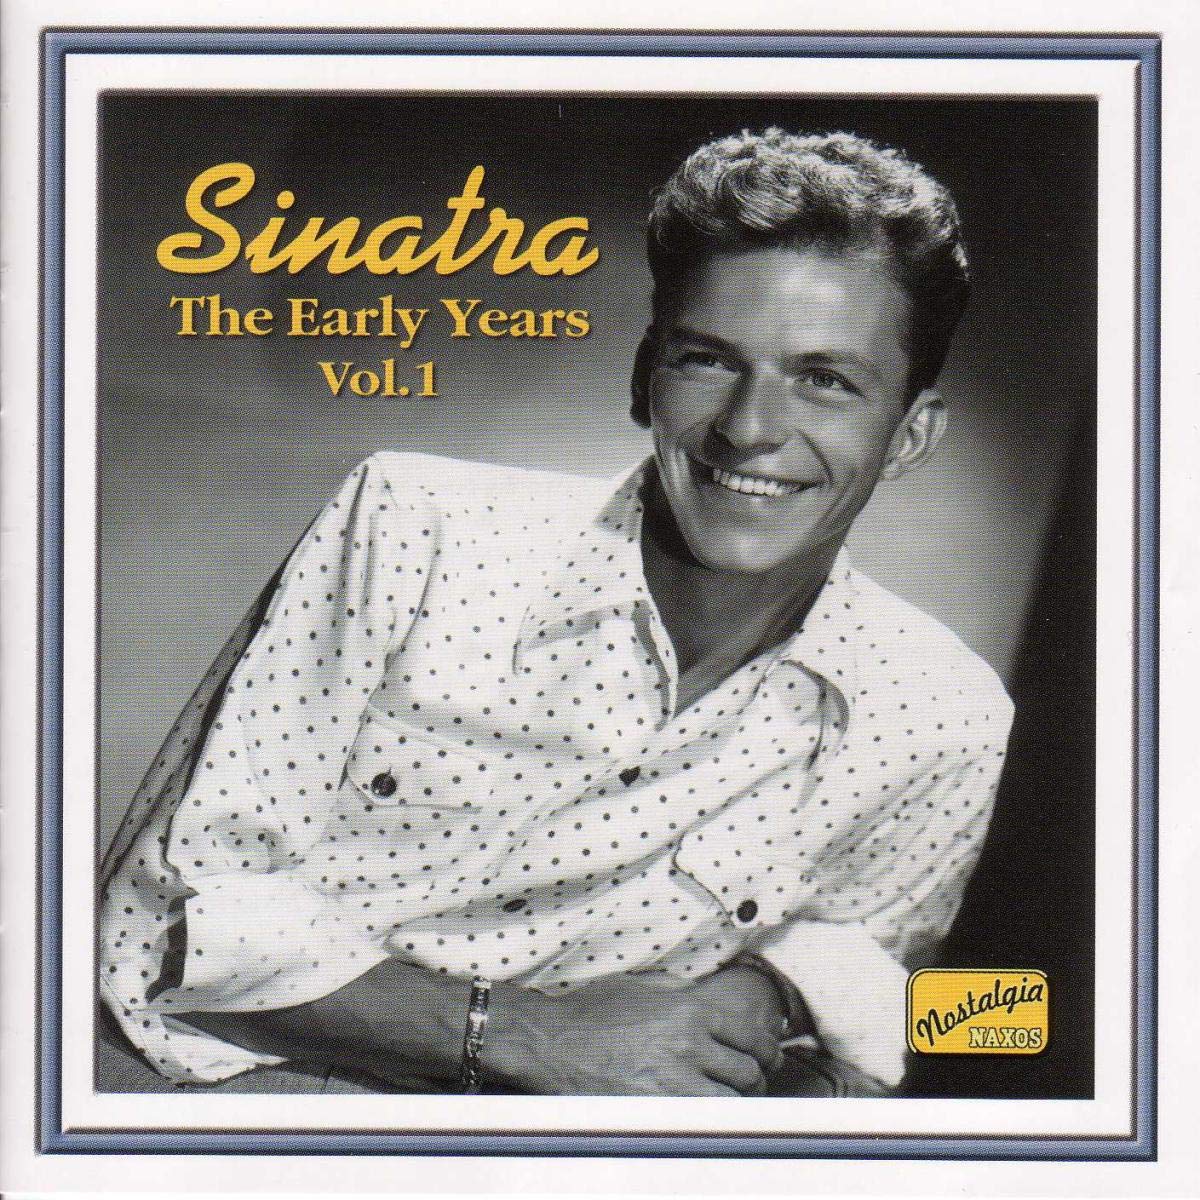 FRANK SINATRA: The Early Years vol. 1